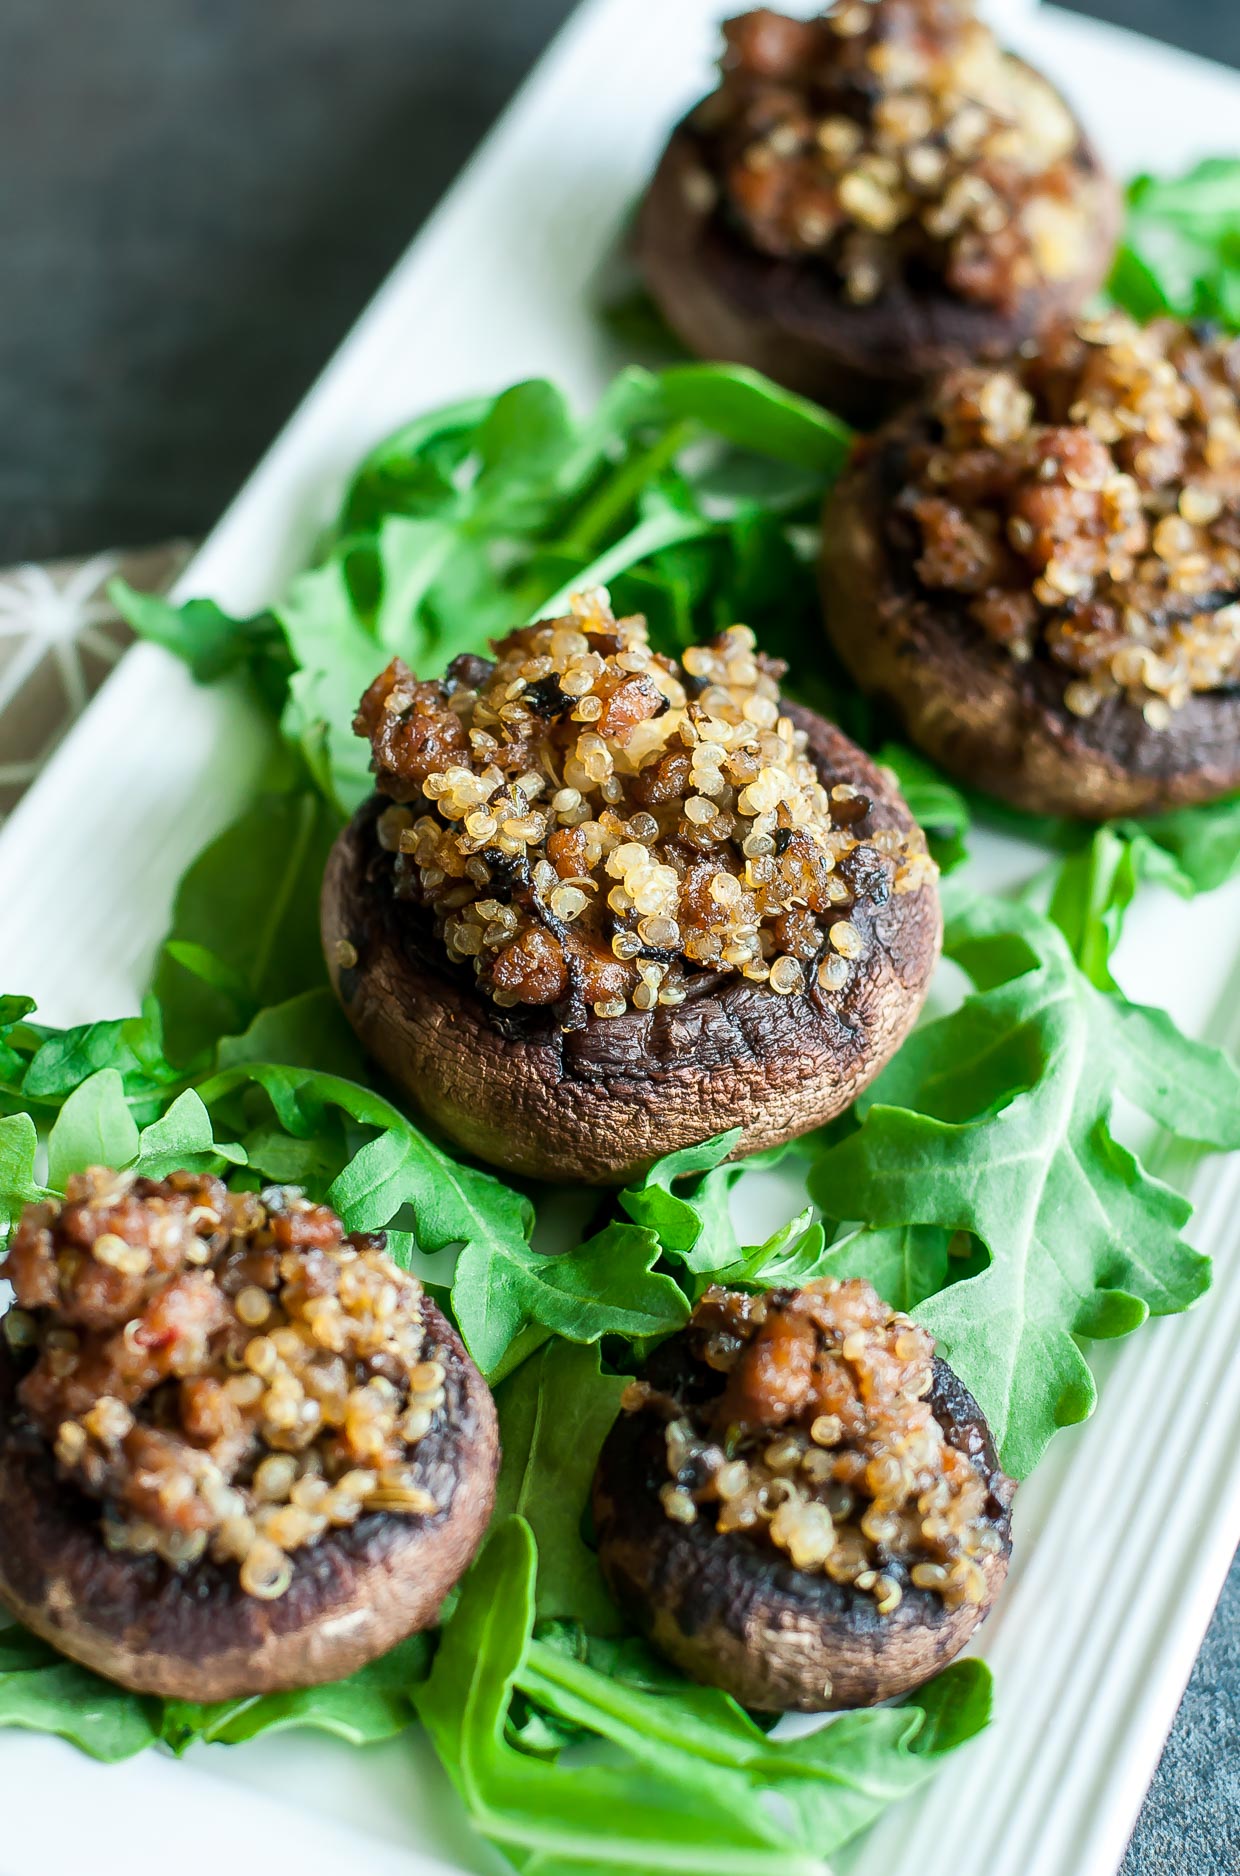 Betcha can't eat just one of these Sausage and Quinoa Stuffed Mushrooms! This delicious party appetizer is wildly addictive and gloriously gluten-free too.